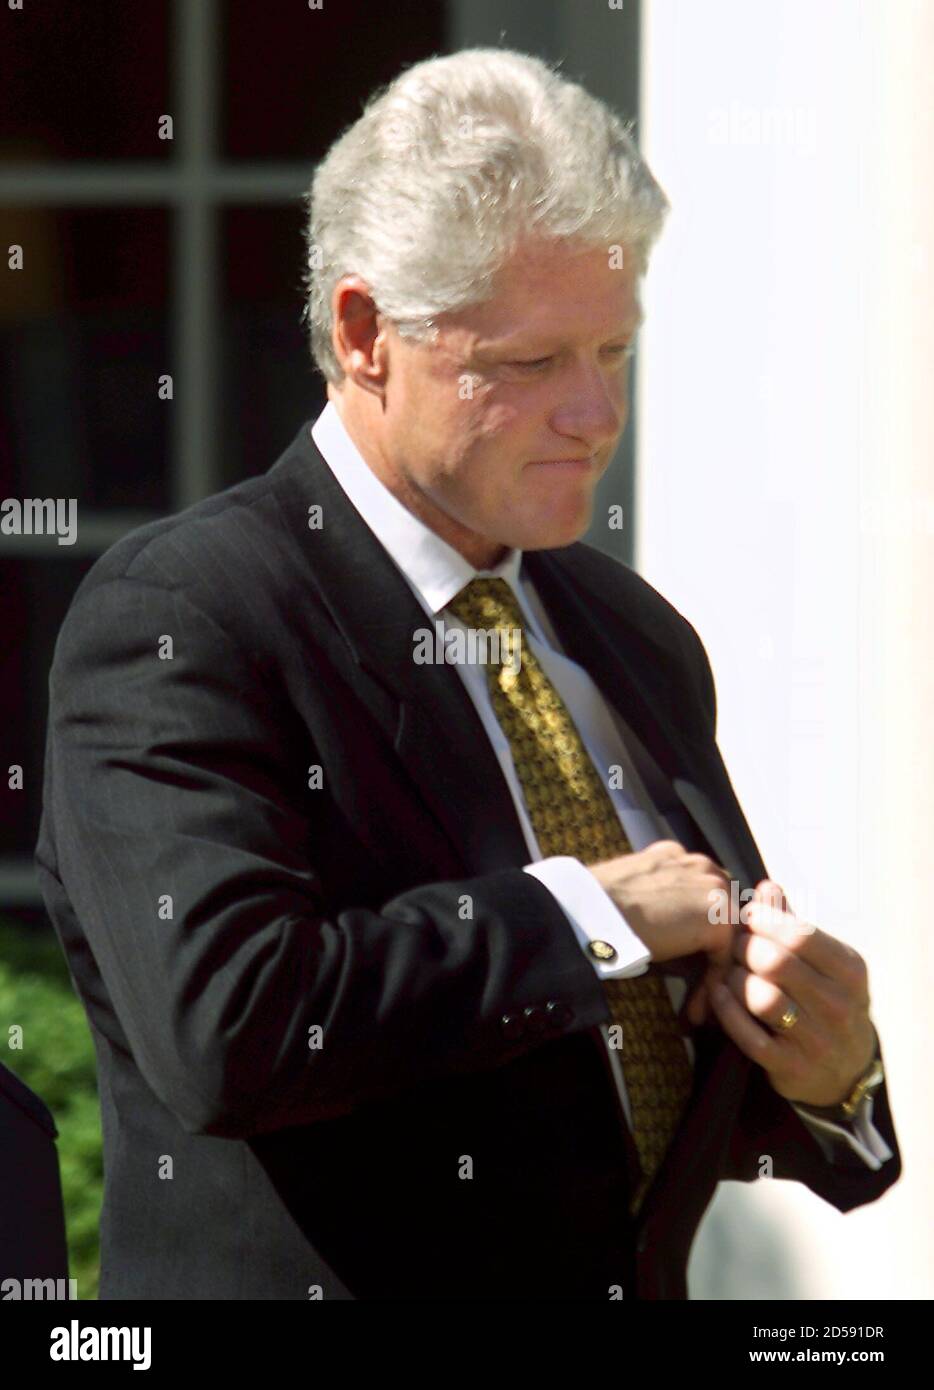 U.S. President Bill Clinton reaches for his pen as he prepares to veto the Republican backed $792 billion tax cut plan, setting the stage for an autumn budget showdown and giving both parties a campaign issue for the 2000 elections, September 23. Clinton said the bill 'would turn us back to the failed policies of the past.  WM/HB Stock Photo